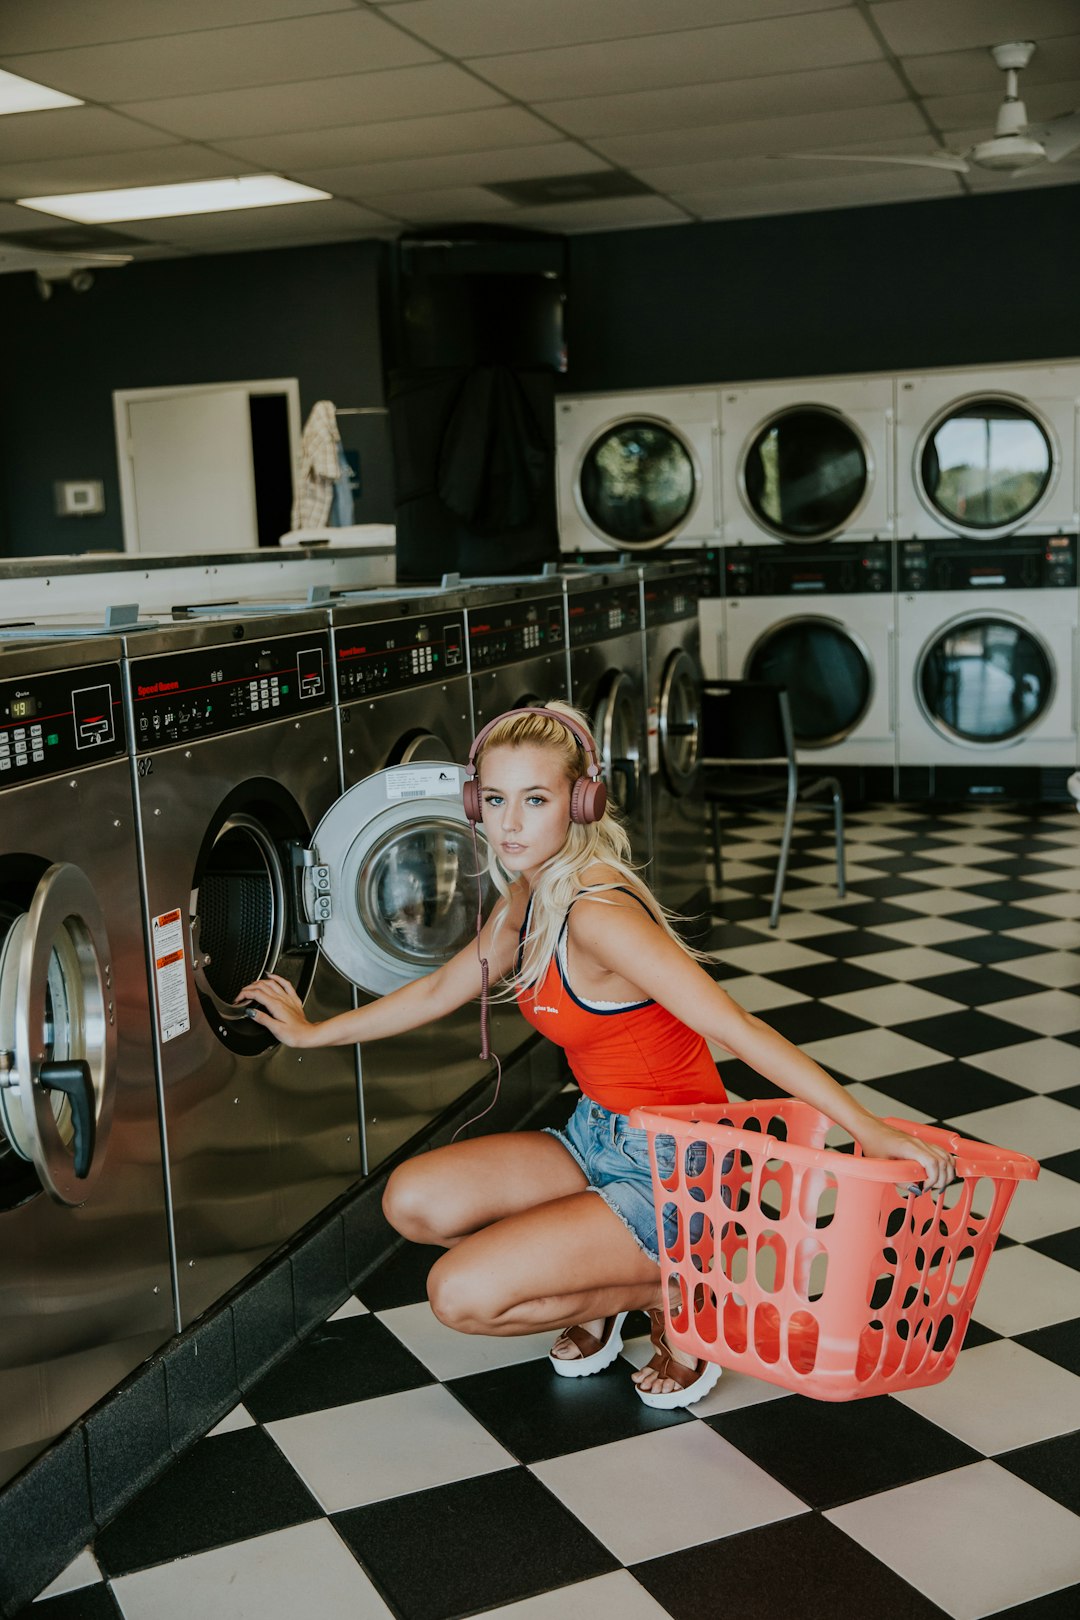 Doing the laundry to favorite music